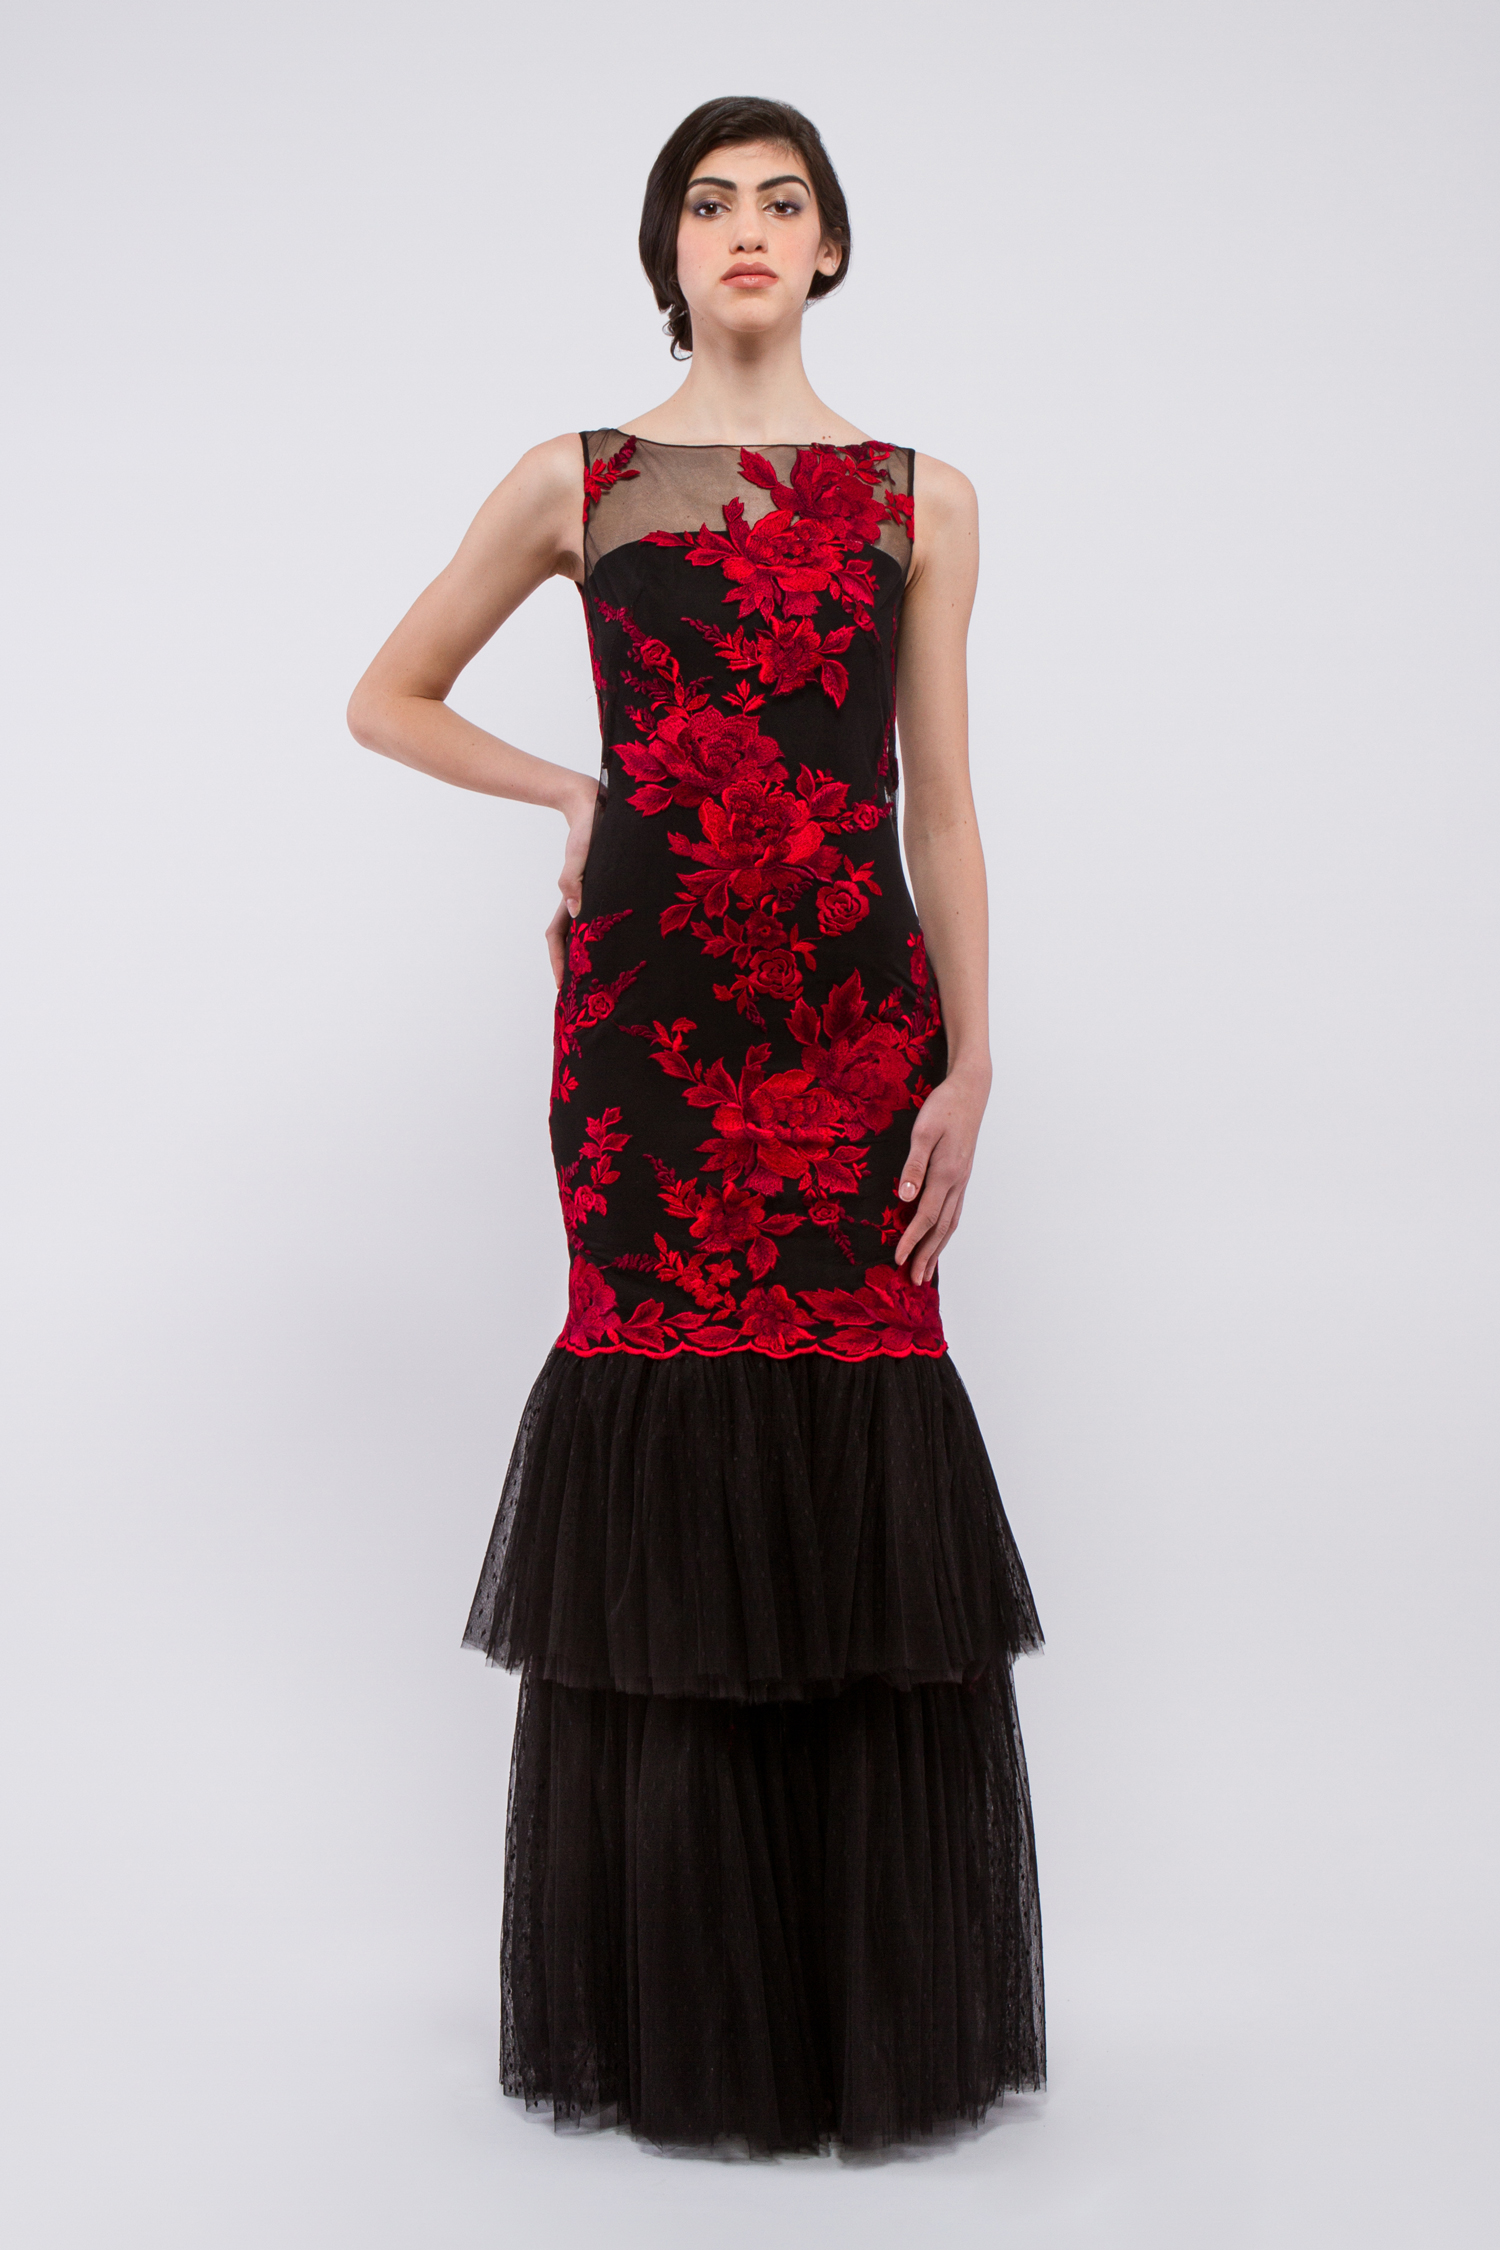 Bias cut silk velvet gown with charmeuse draped bodice - Look 6 - The Dream